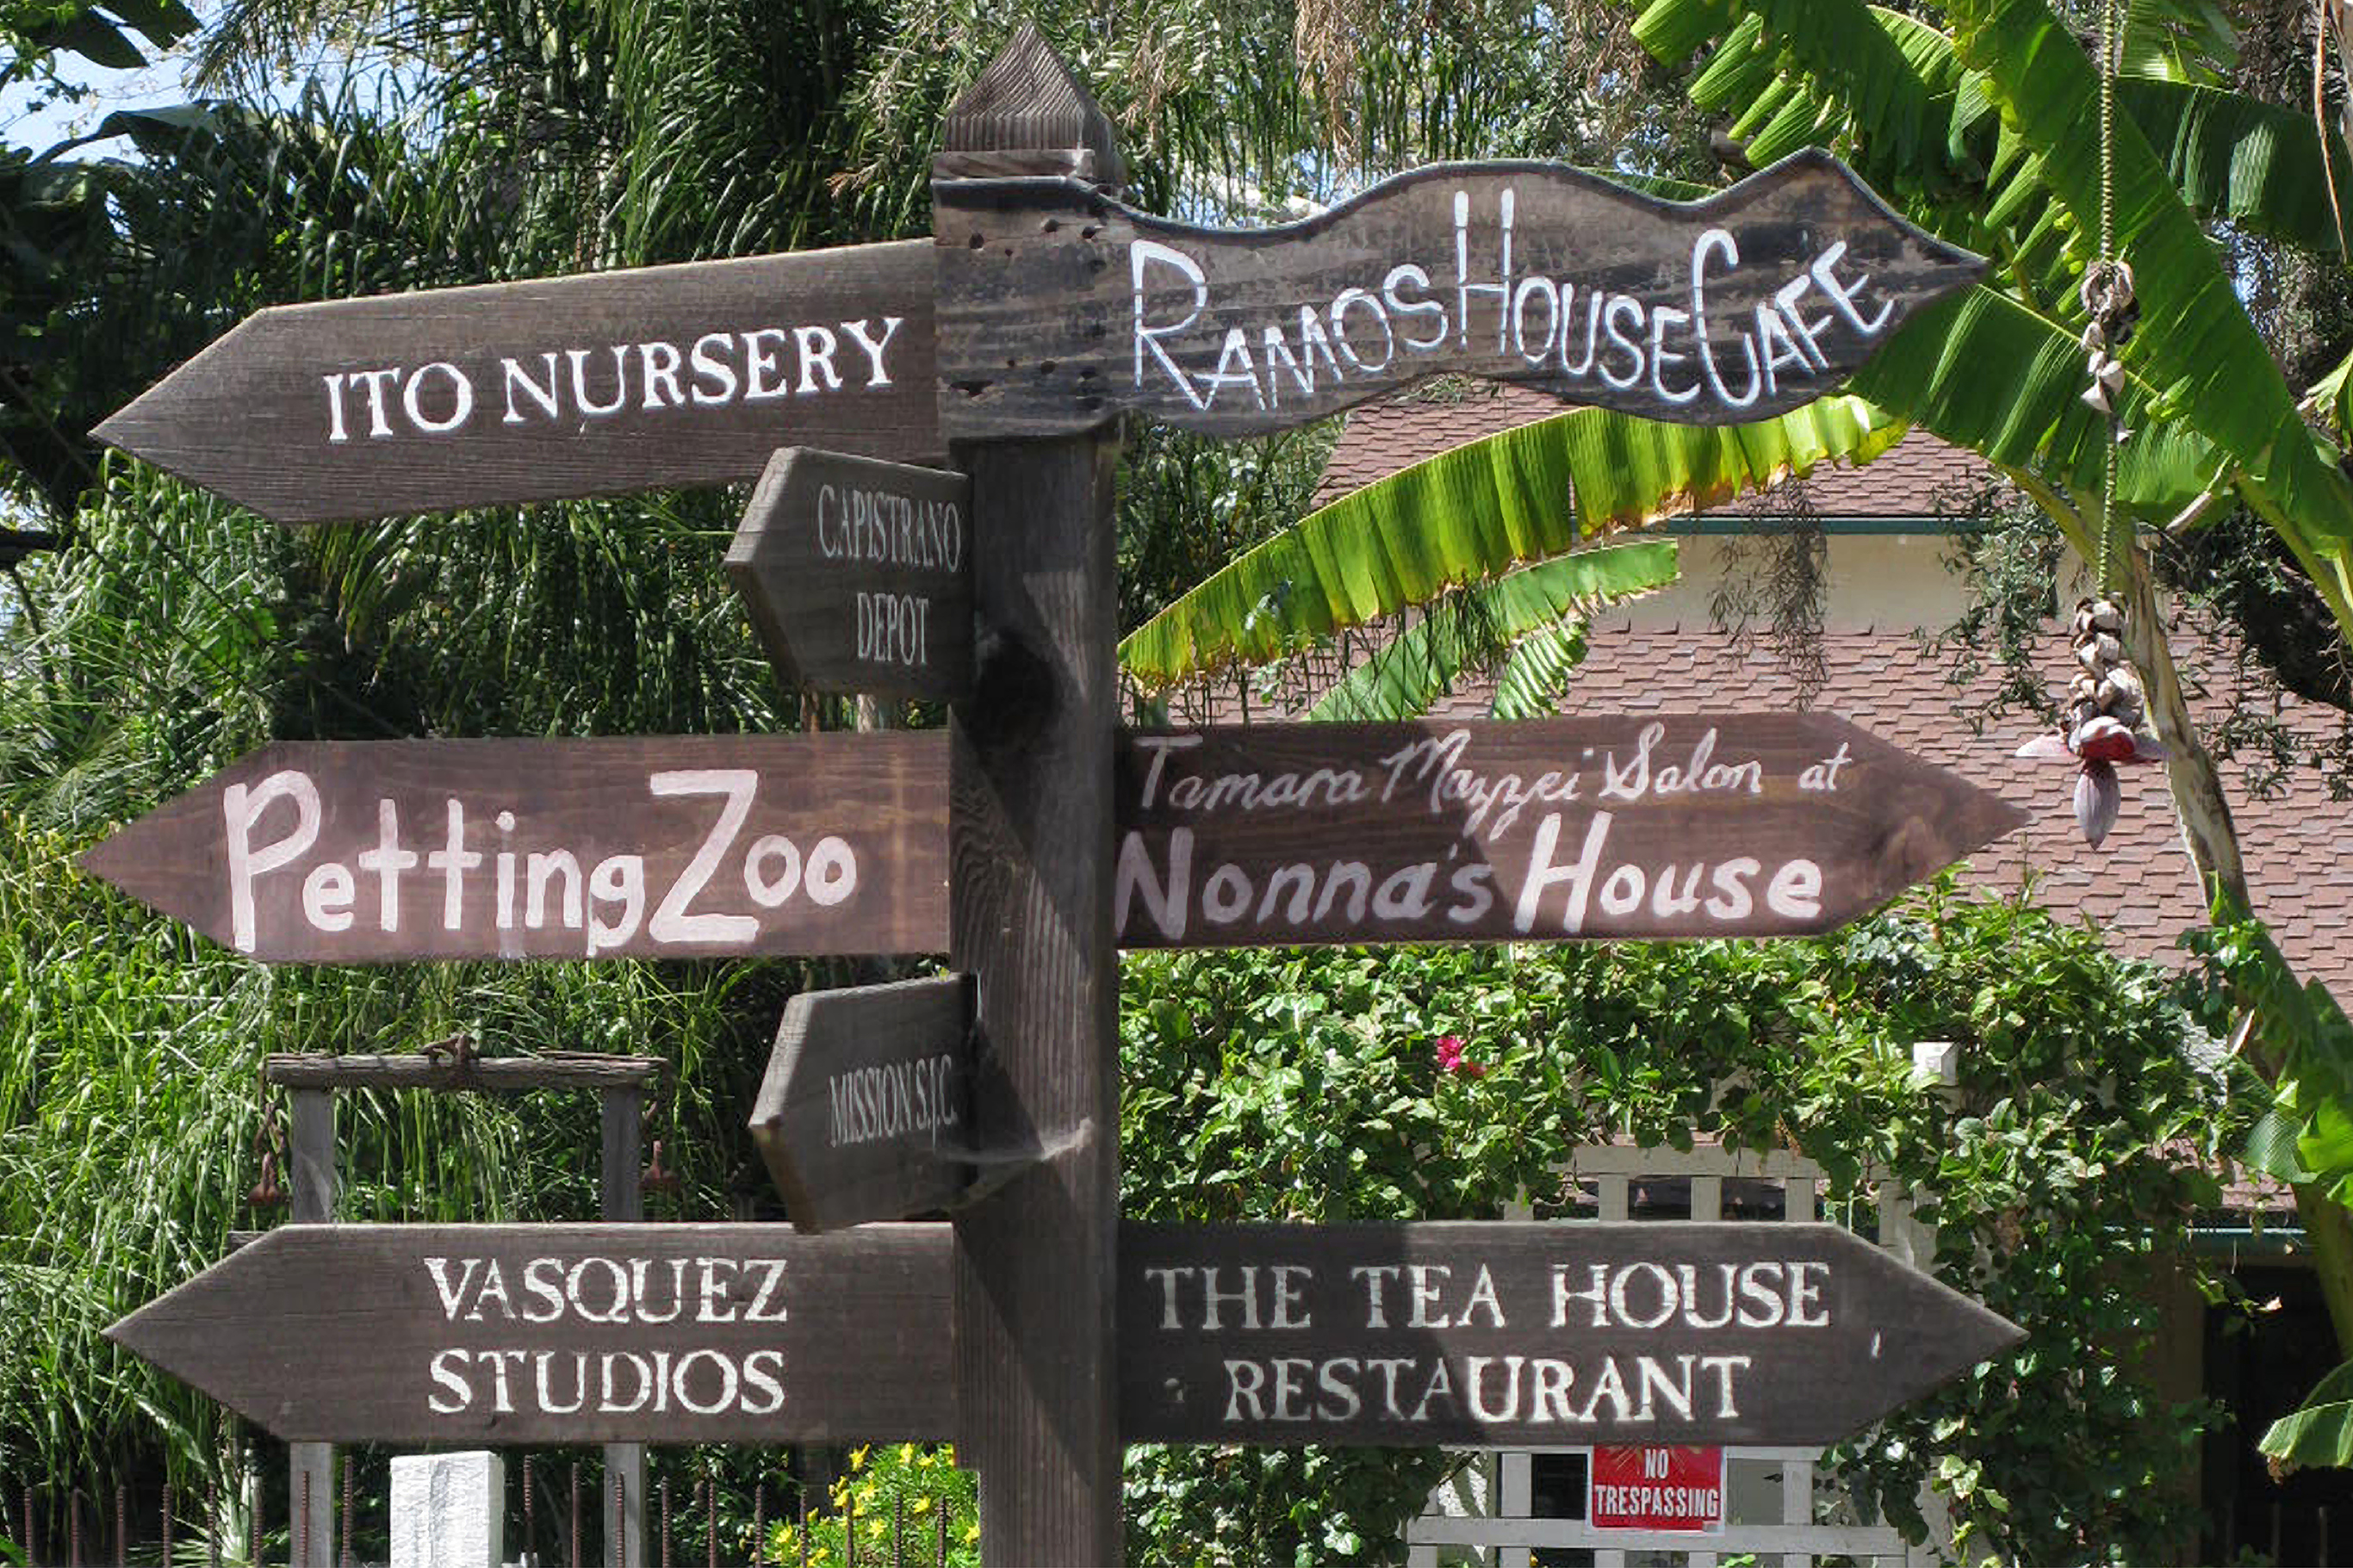 Sign in San Juan Capistrano.  Ito Nursery, Petting Zoo and Vasquez Studios to the left. Ramos House Cafe, Nonna's House, and The Tea House Restaurant to the right.